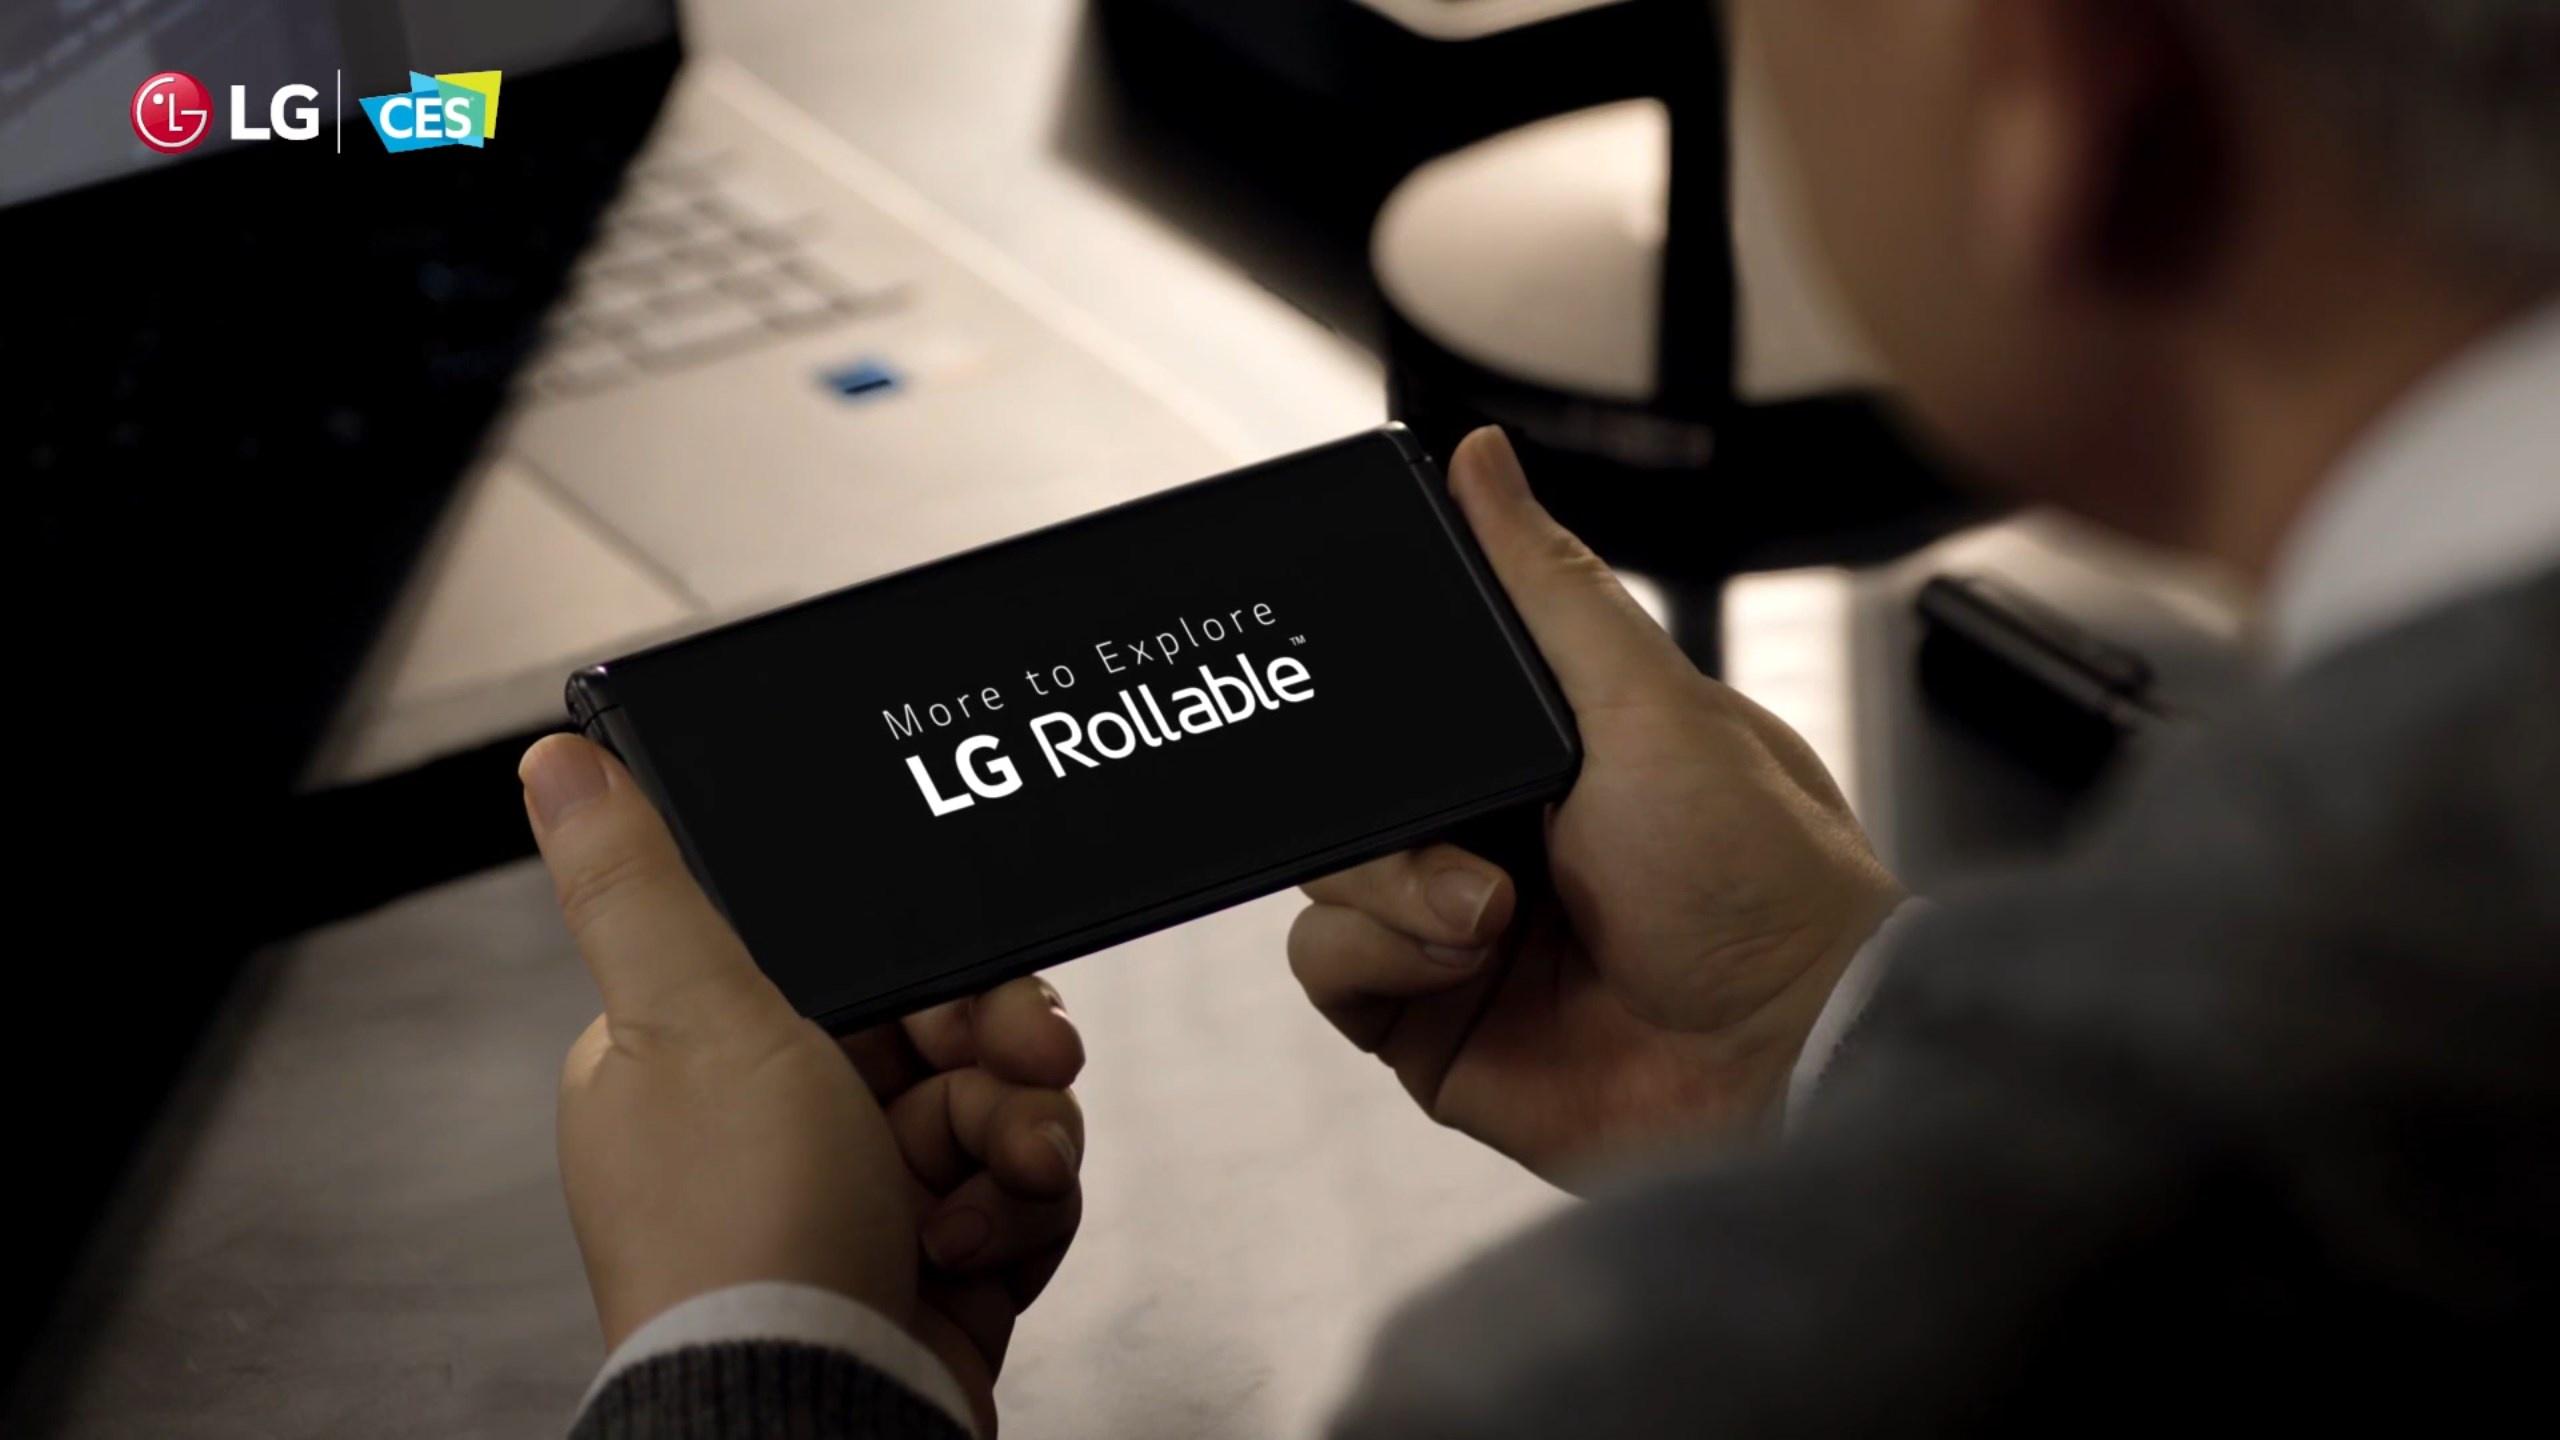 LG’s Rollable phone.